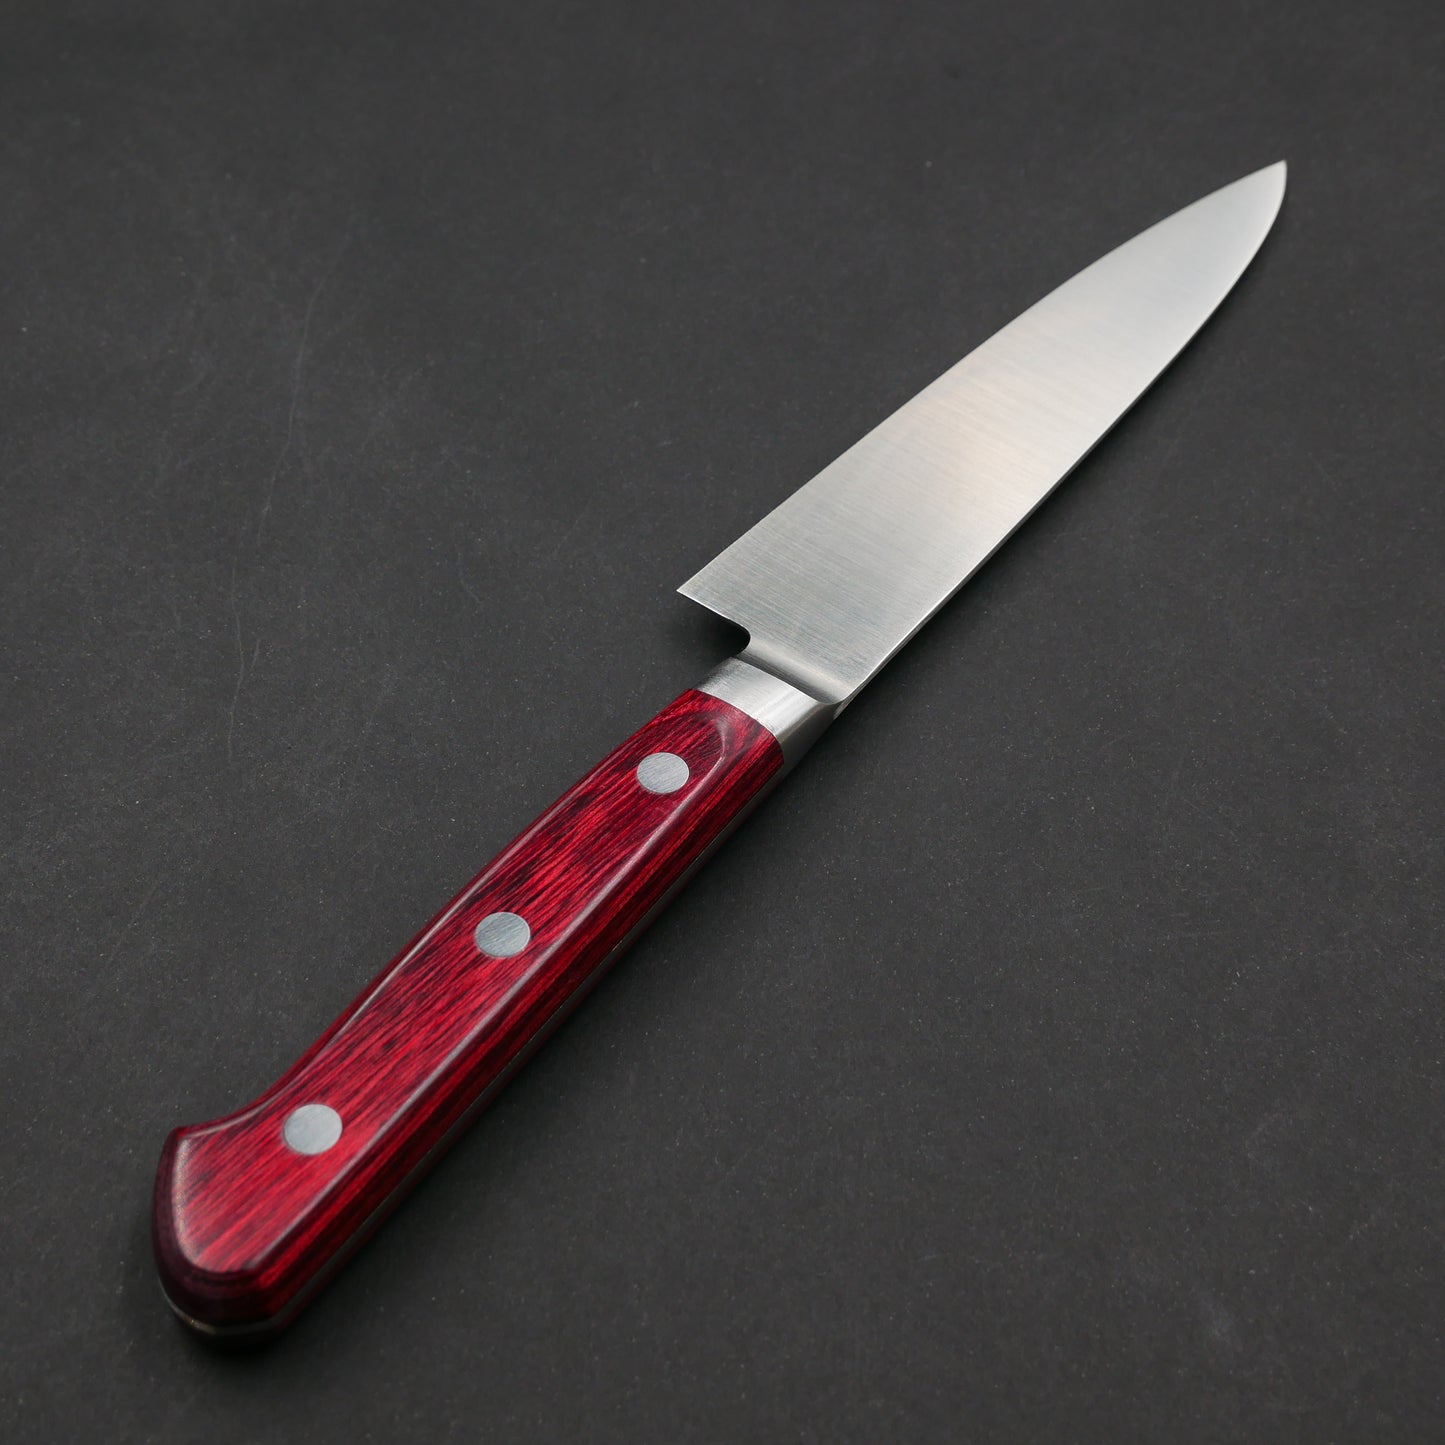 VG1 Petty Red Handle